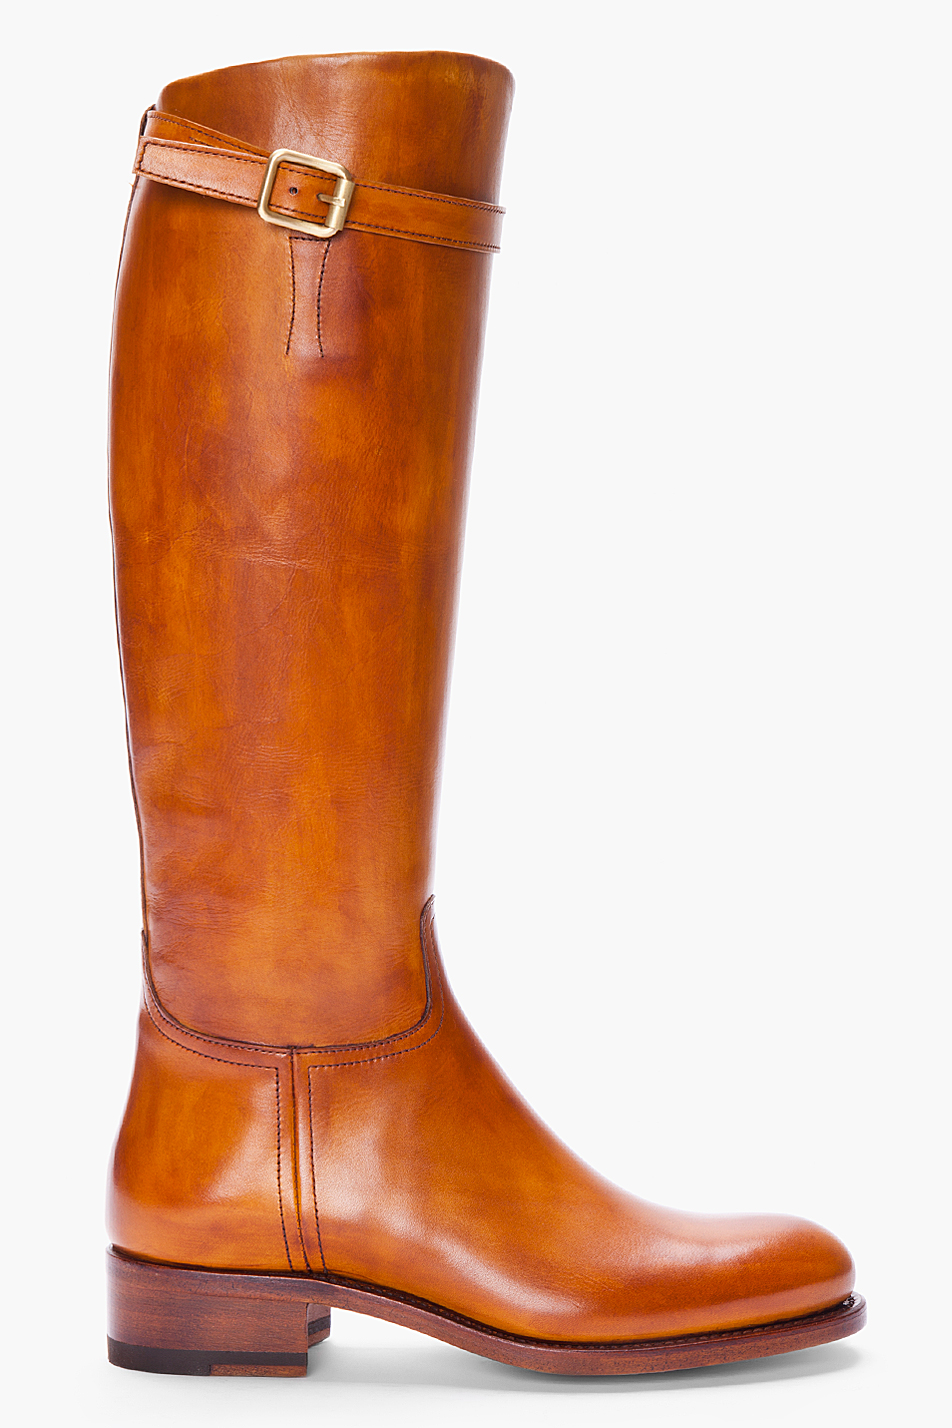 Lyst  Rupert Sanderson Tan Leather Vermont Riding Boots in Brown